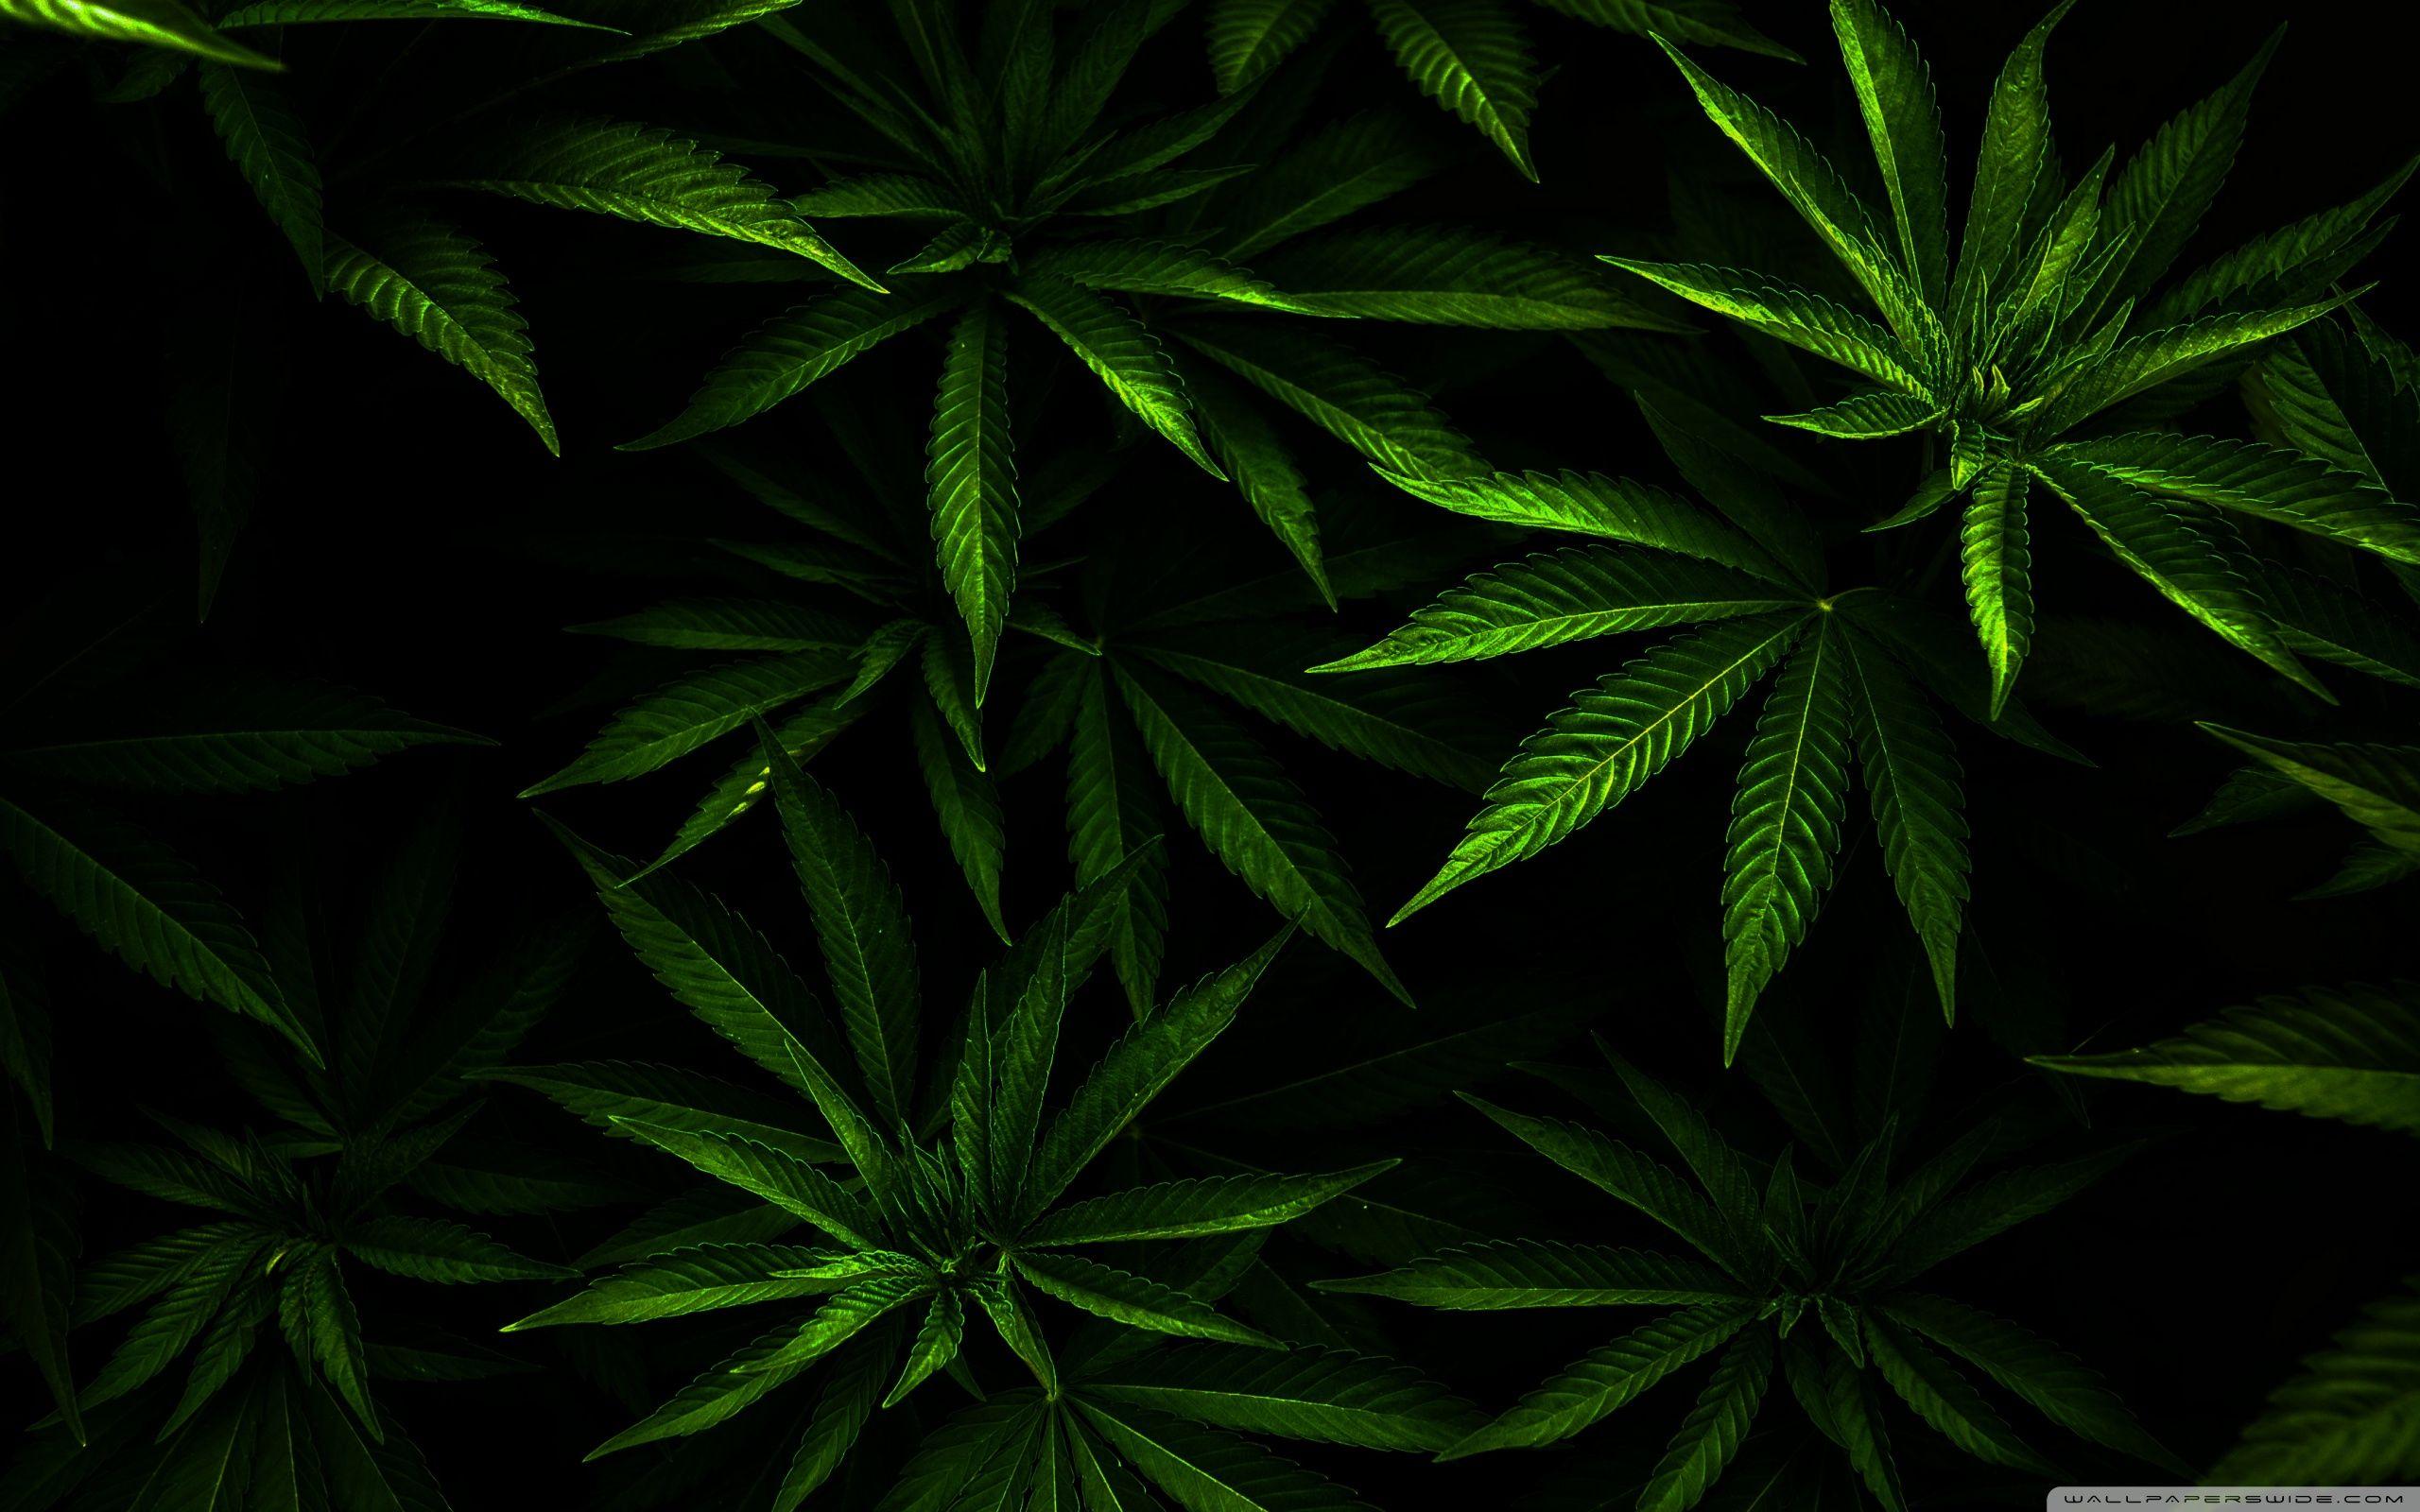 HD Weed Widescreen 1080P Wallpaper Free HD Weed Widescreen 1080P Background